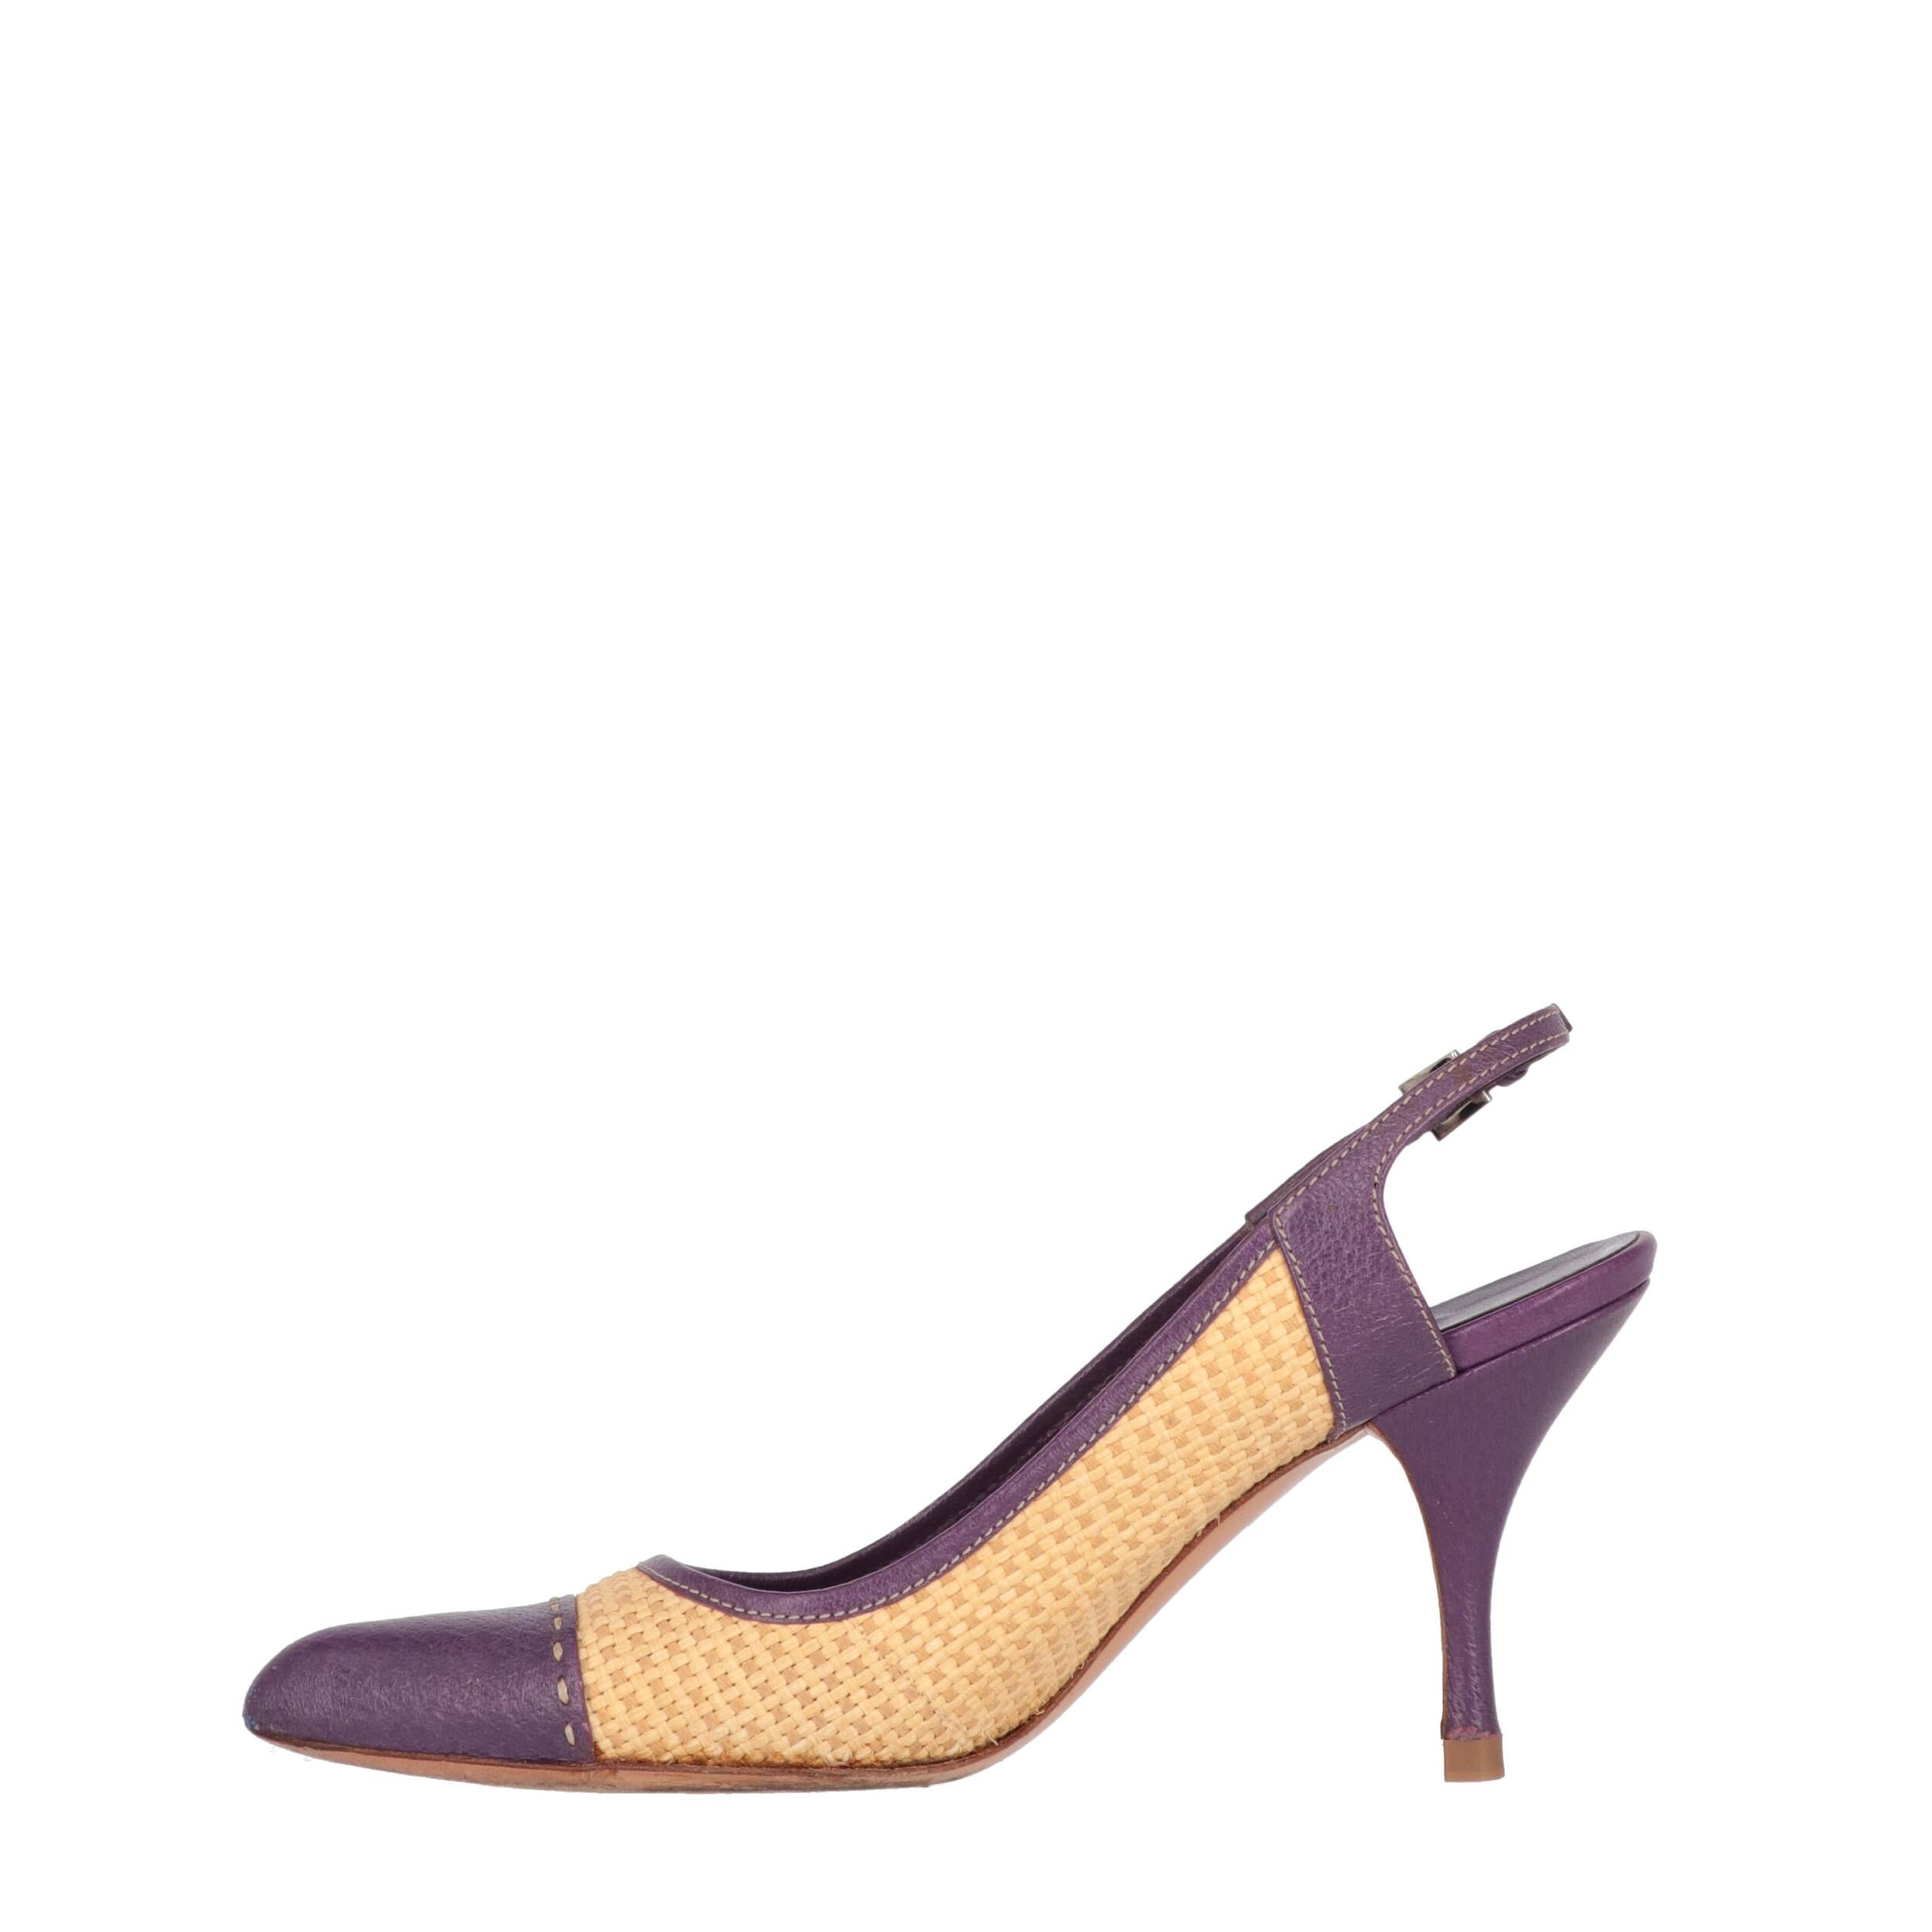 Prada raffia with purple leather inserts open on the back shoes. Purple leather logoed insole and medium heel.

The product has slight traces of use as shown in the pictures.

Years: 2000s

Made in Italy

Size: 37 EU

Heels: 9 cm
Insole length: 24,5